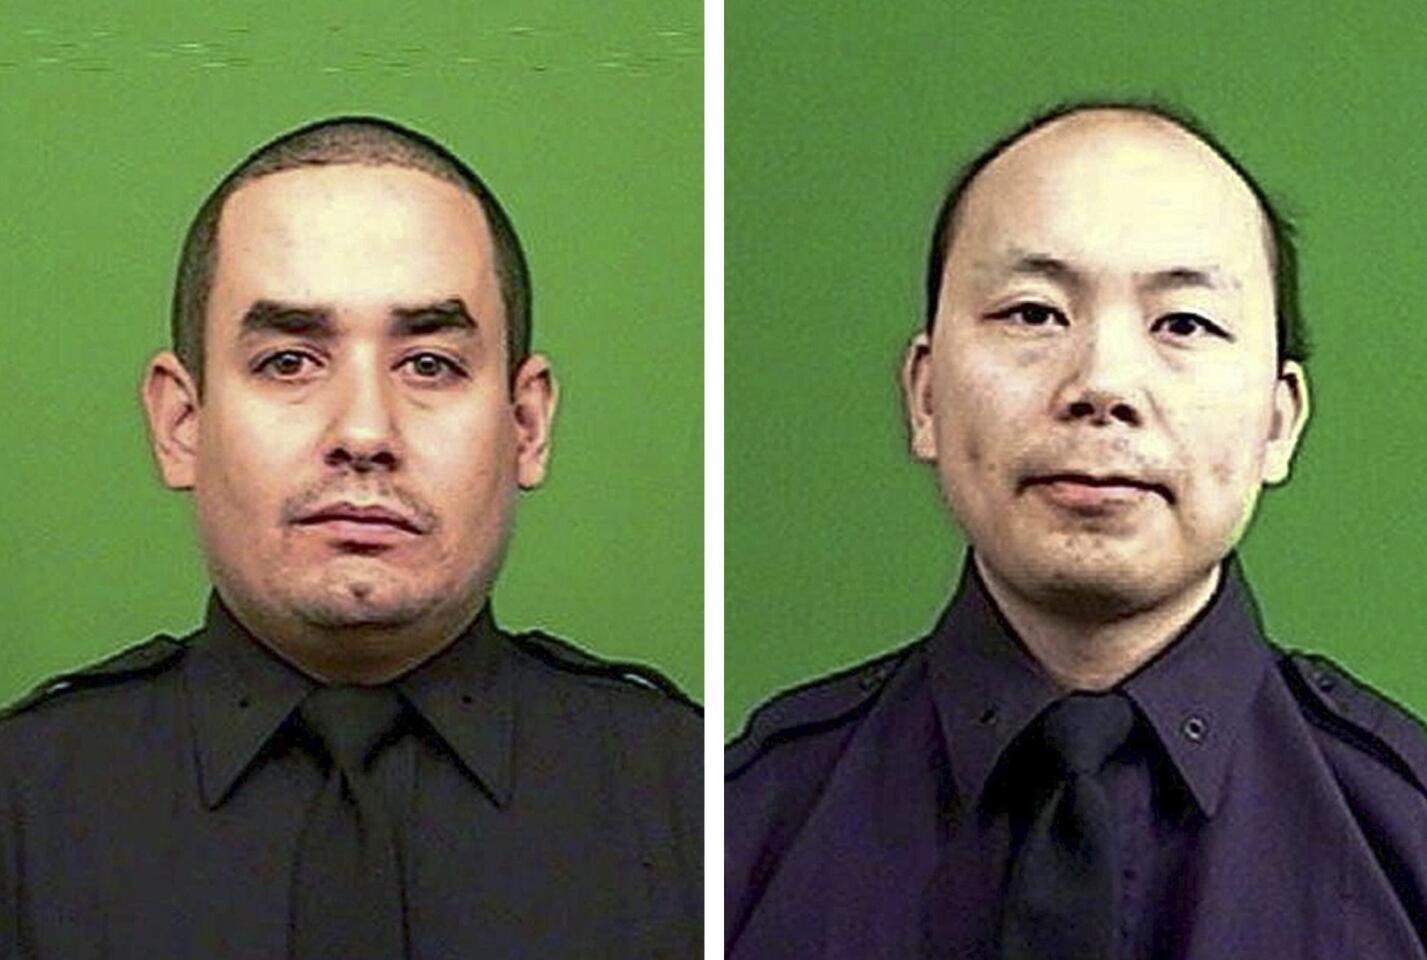 A combo handout picture released by the New York City Police Department (NYPD) on 21 December 2014 show officers Rafael Ramos (L) and Wenjian Liu (R), who were, according to NYPD Commissioner William Bratton, assassinated while sitting in their patrol car in the Brooklyn borough of New York, New York, USA, 20 December 2014.